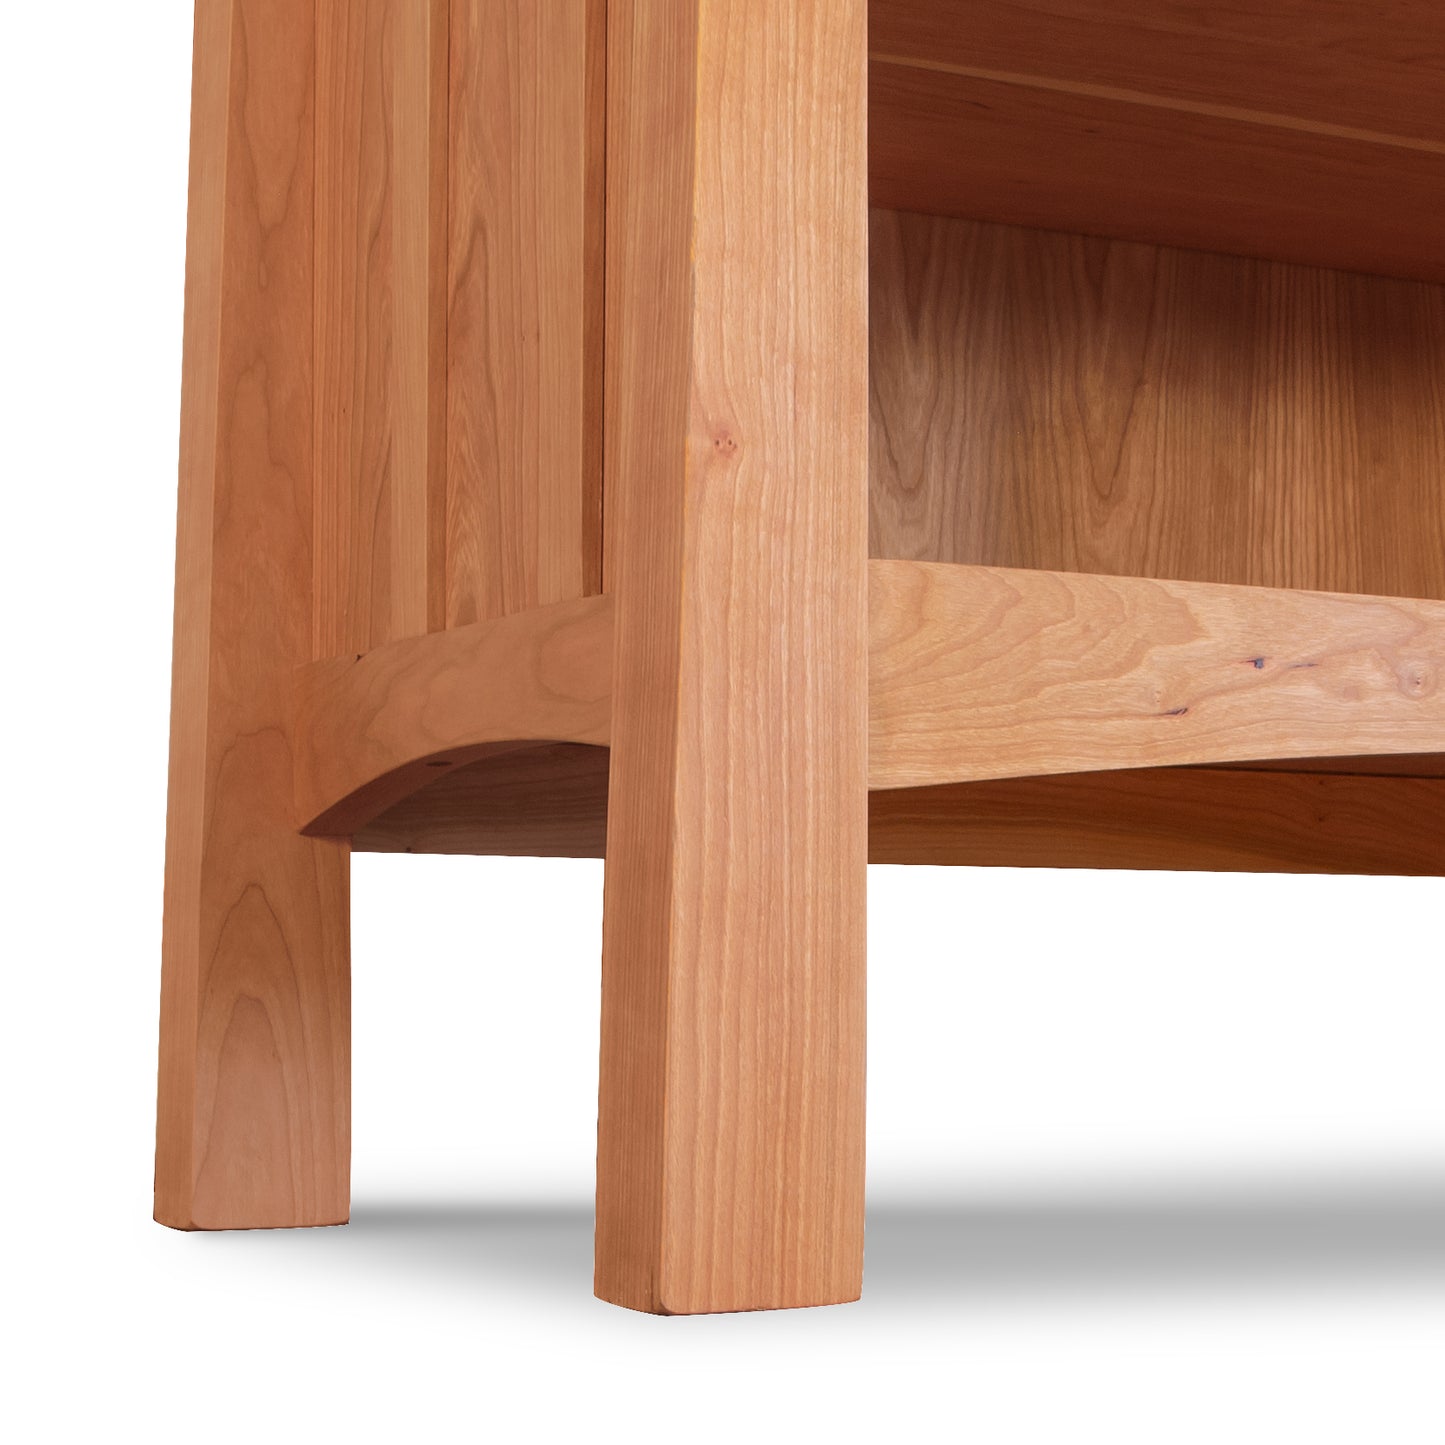 Close-up of a Vermont Furniture Designs Contemporary Craftsman Custom Bookcase piece showing detail of the leg joint and shelf.